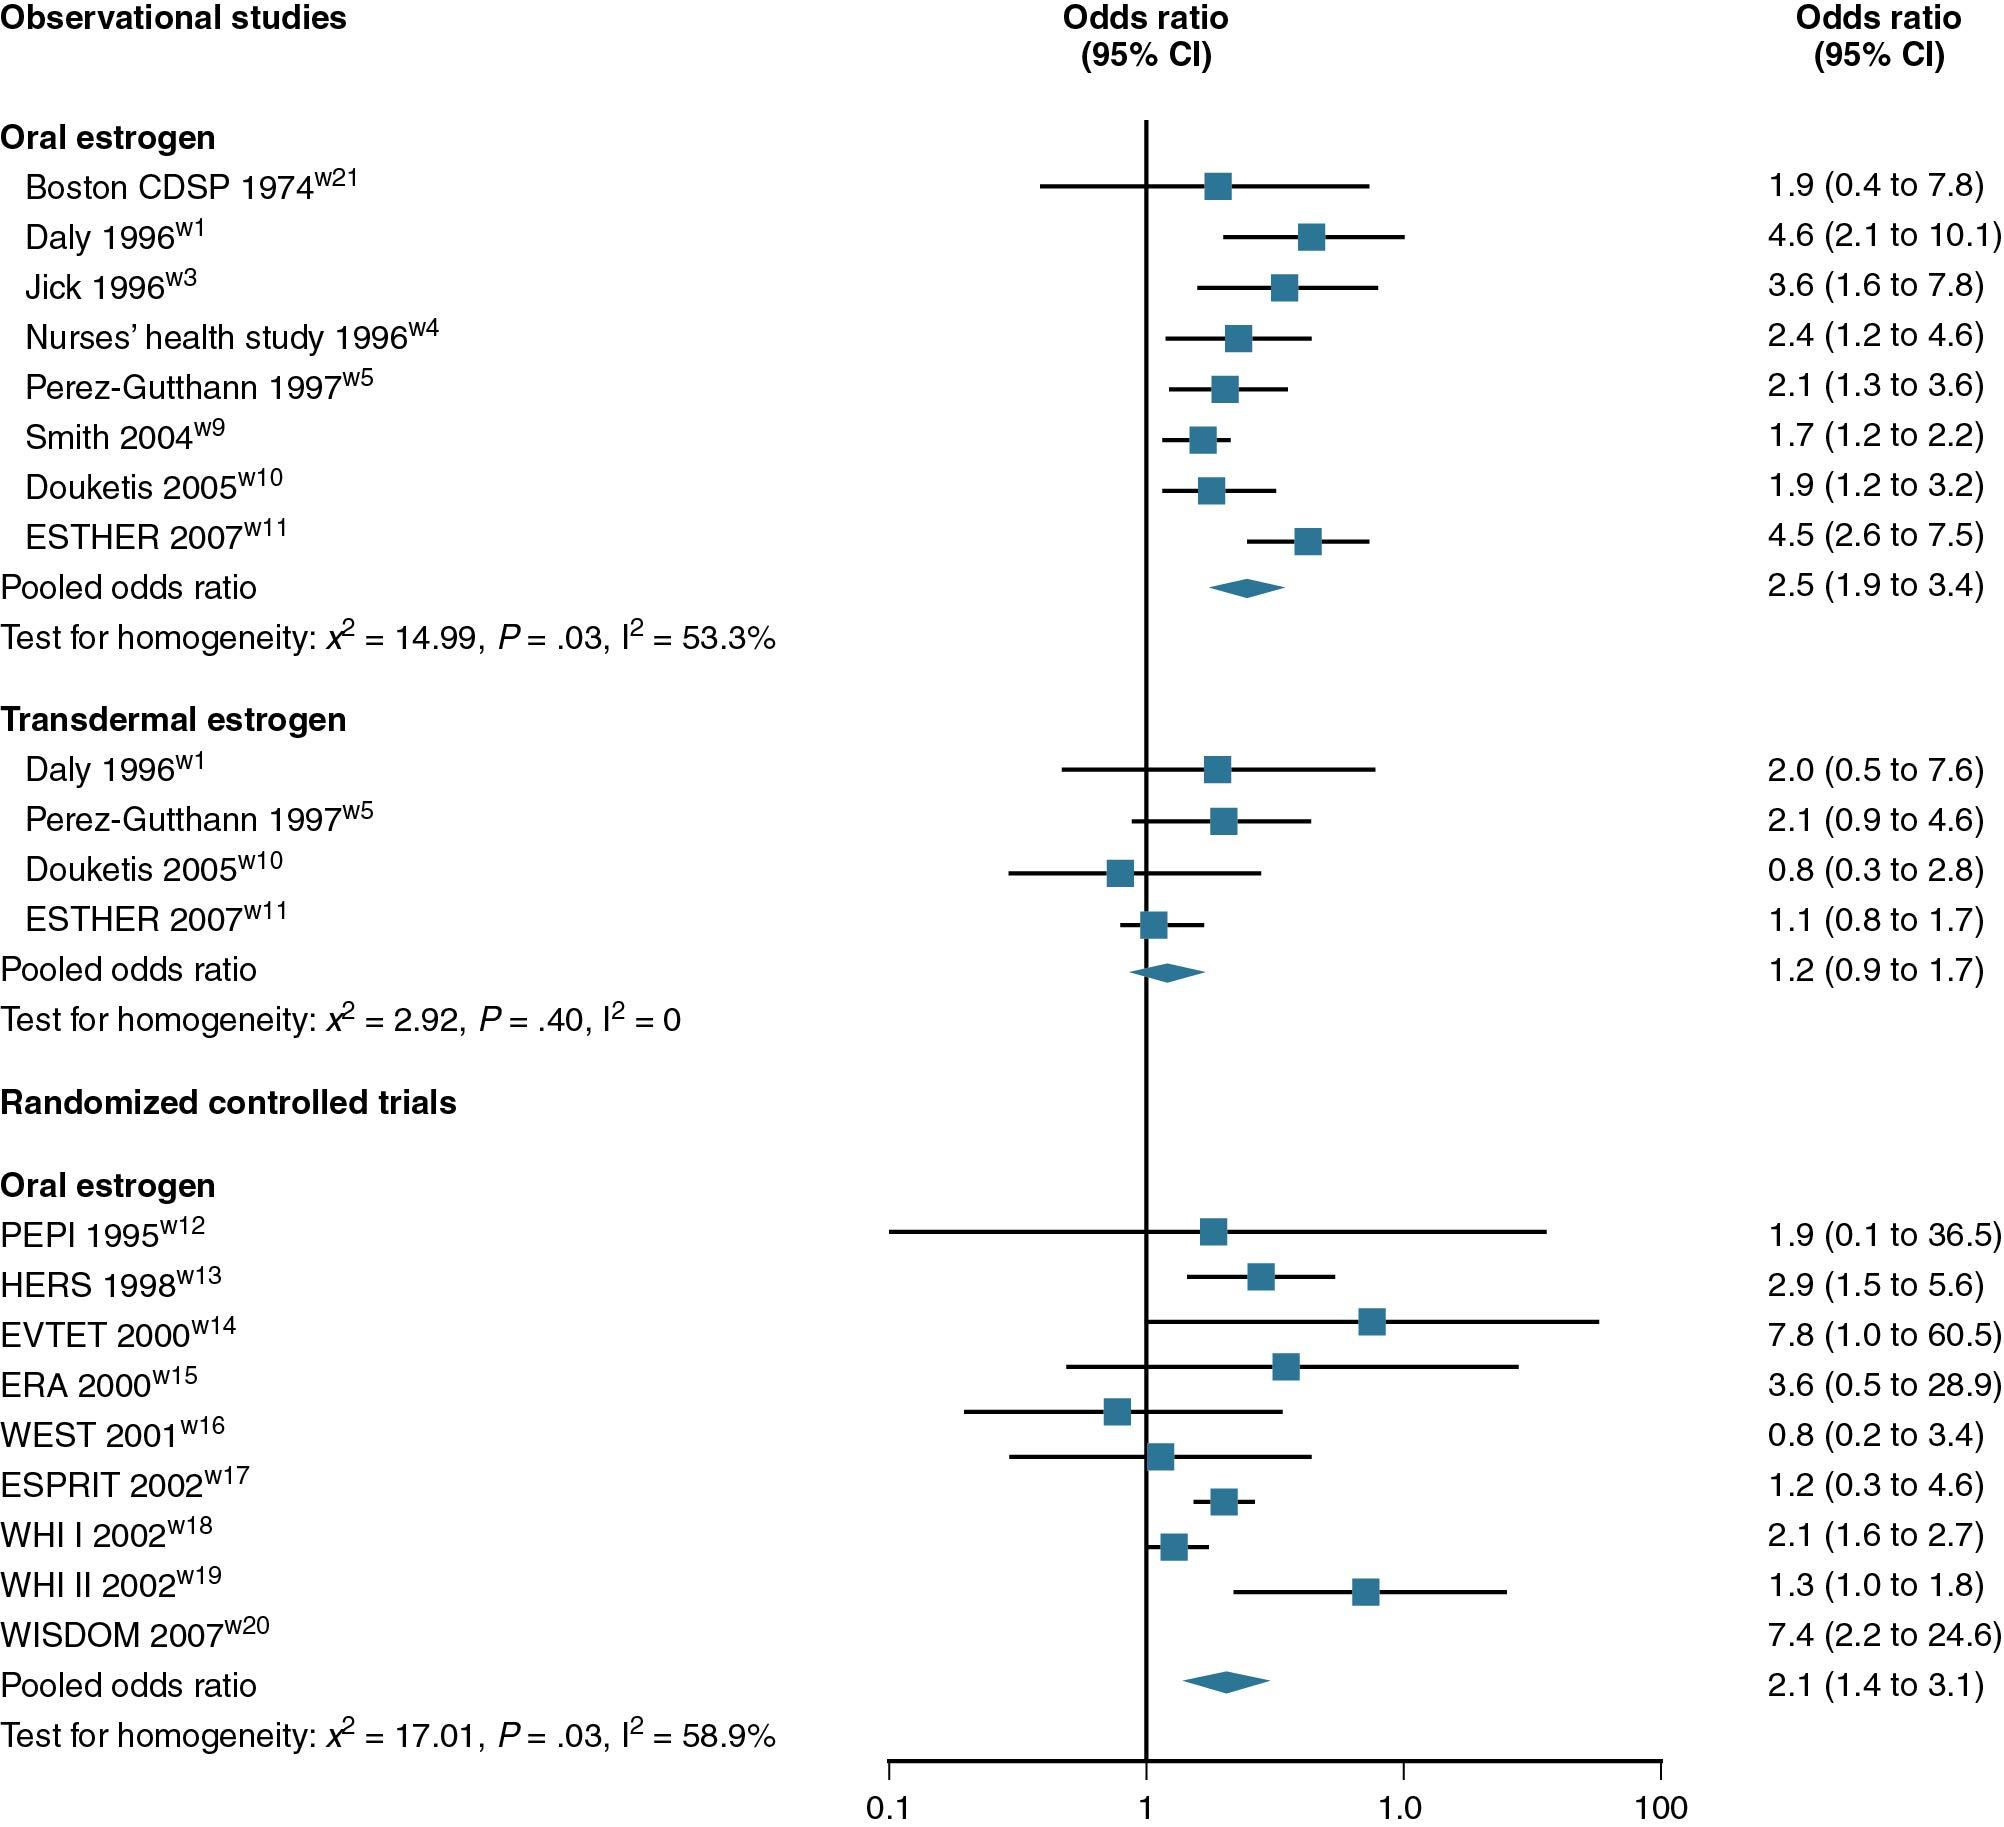 Fig. 14.33, Meta-analysis of various studies showing no increased risk of thrombosis with transdermal therapy. CI, Confidence interval; w, week.